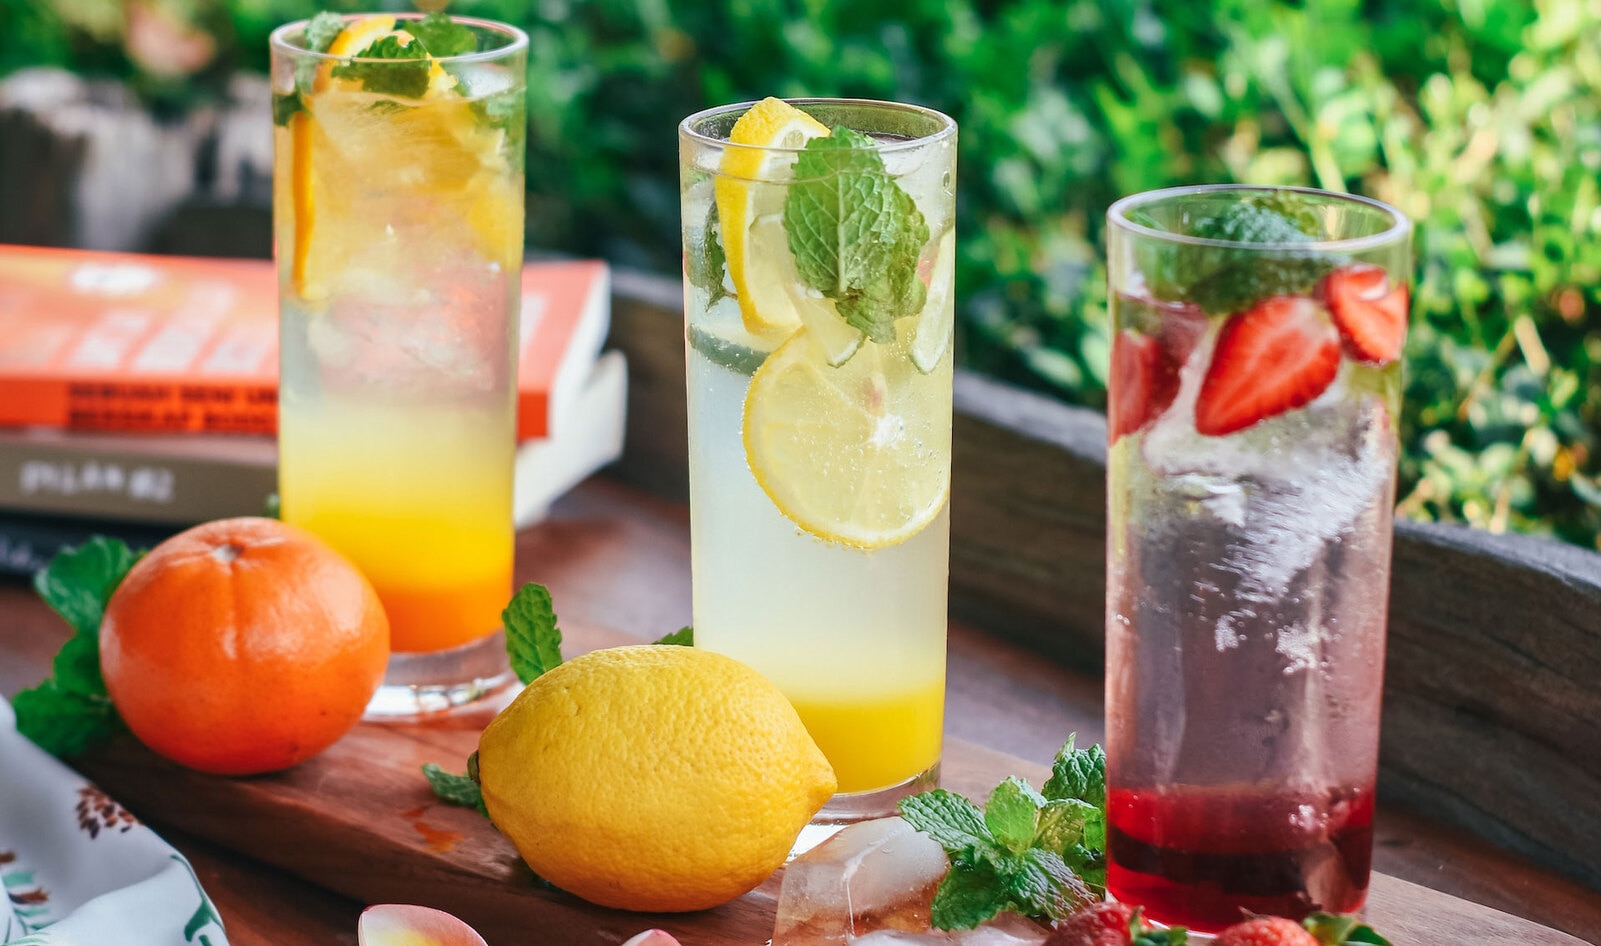 How to Make Lemonade 7 Ways, and the Best Sugar to Use